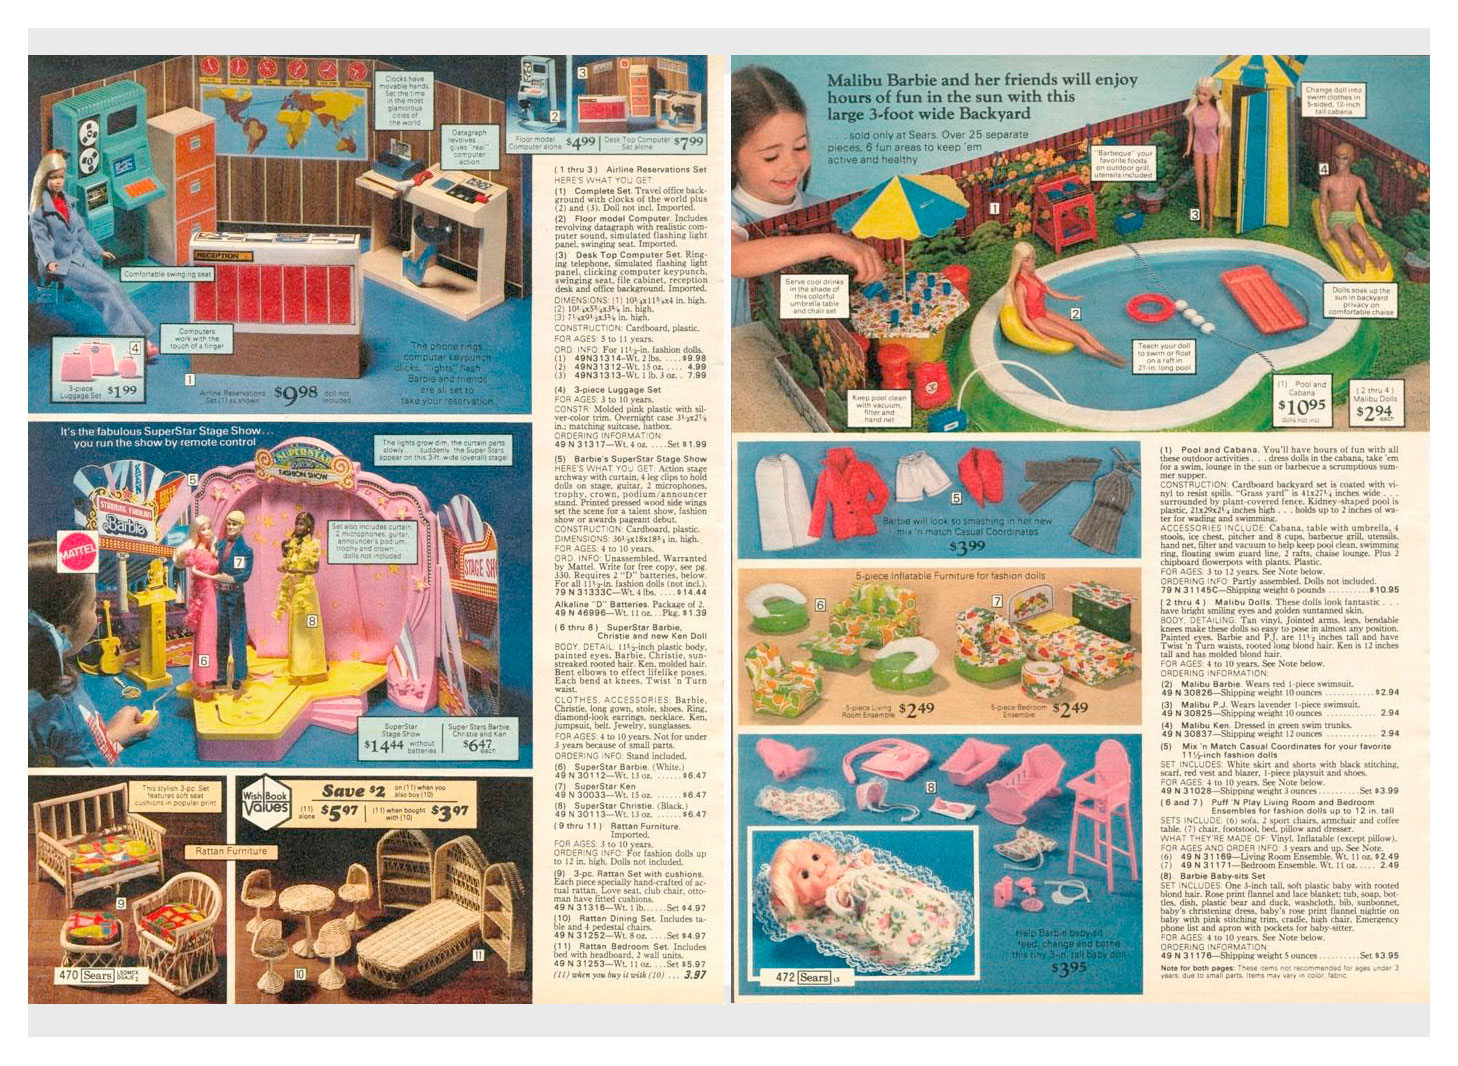 From 1978 Sears Wish Book